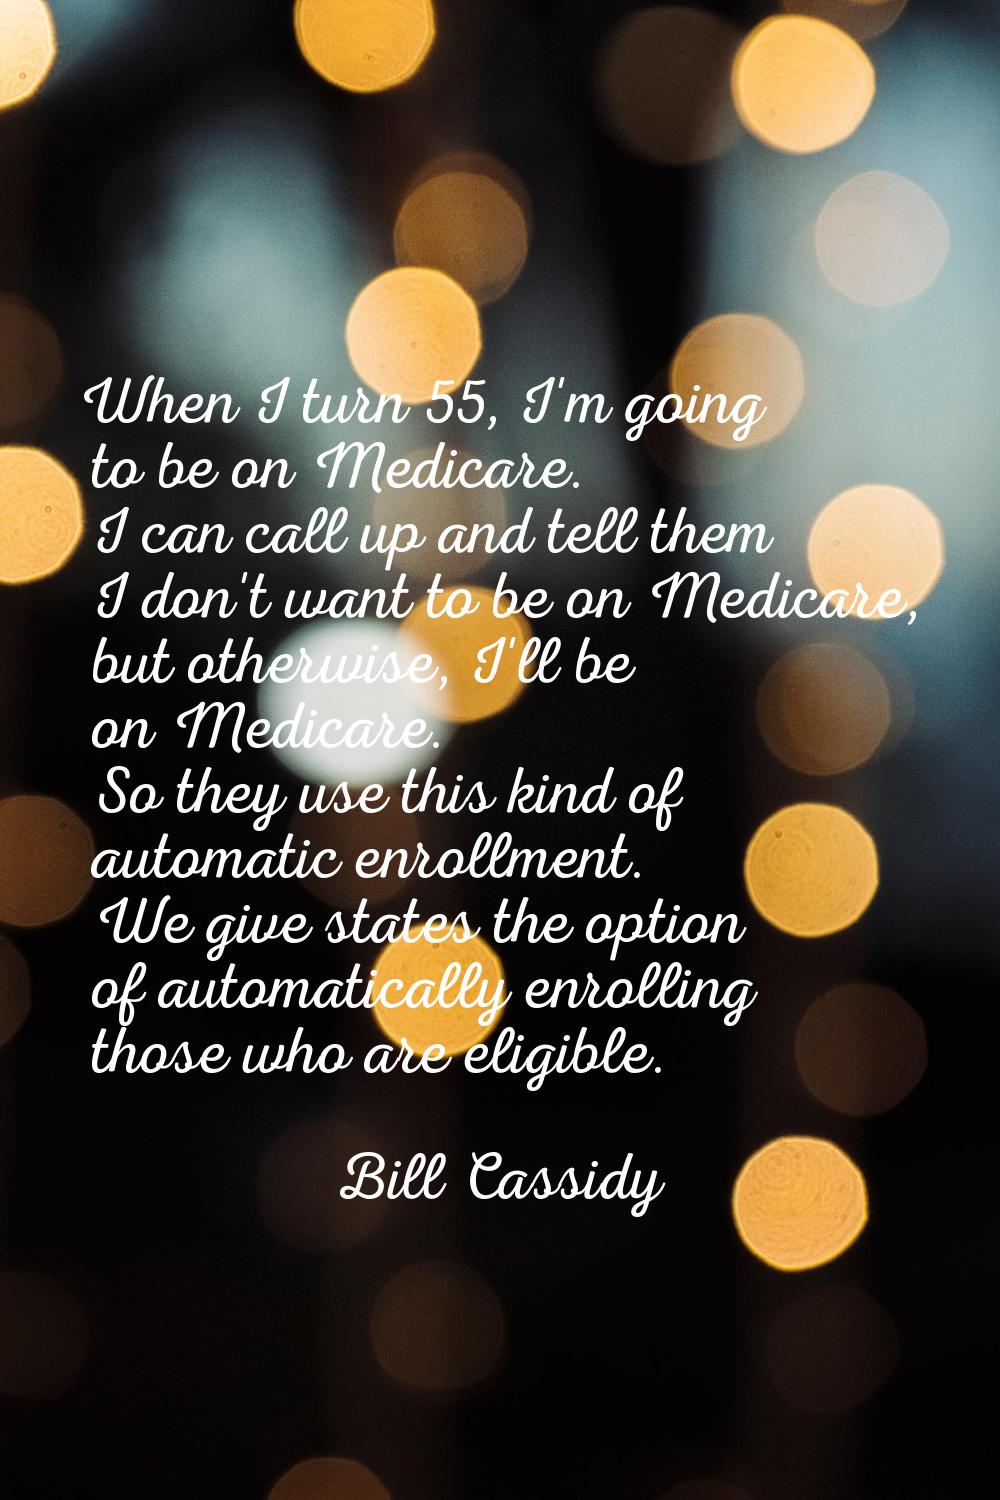 When I turn 55, I'm going to be on Medicare. I can call up and tell them I don't want to be on Medi